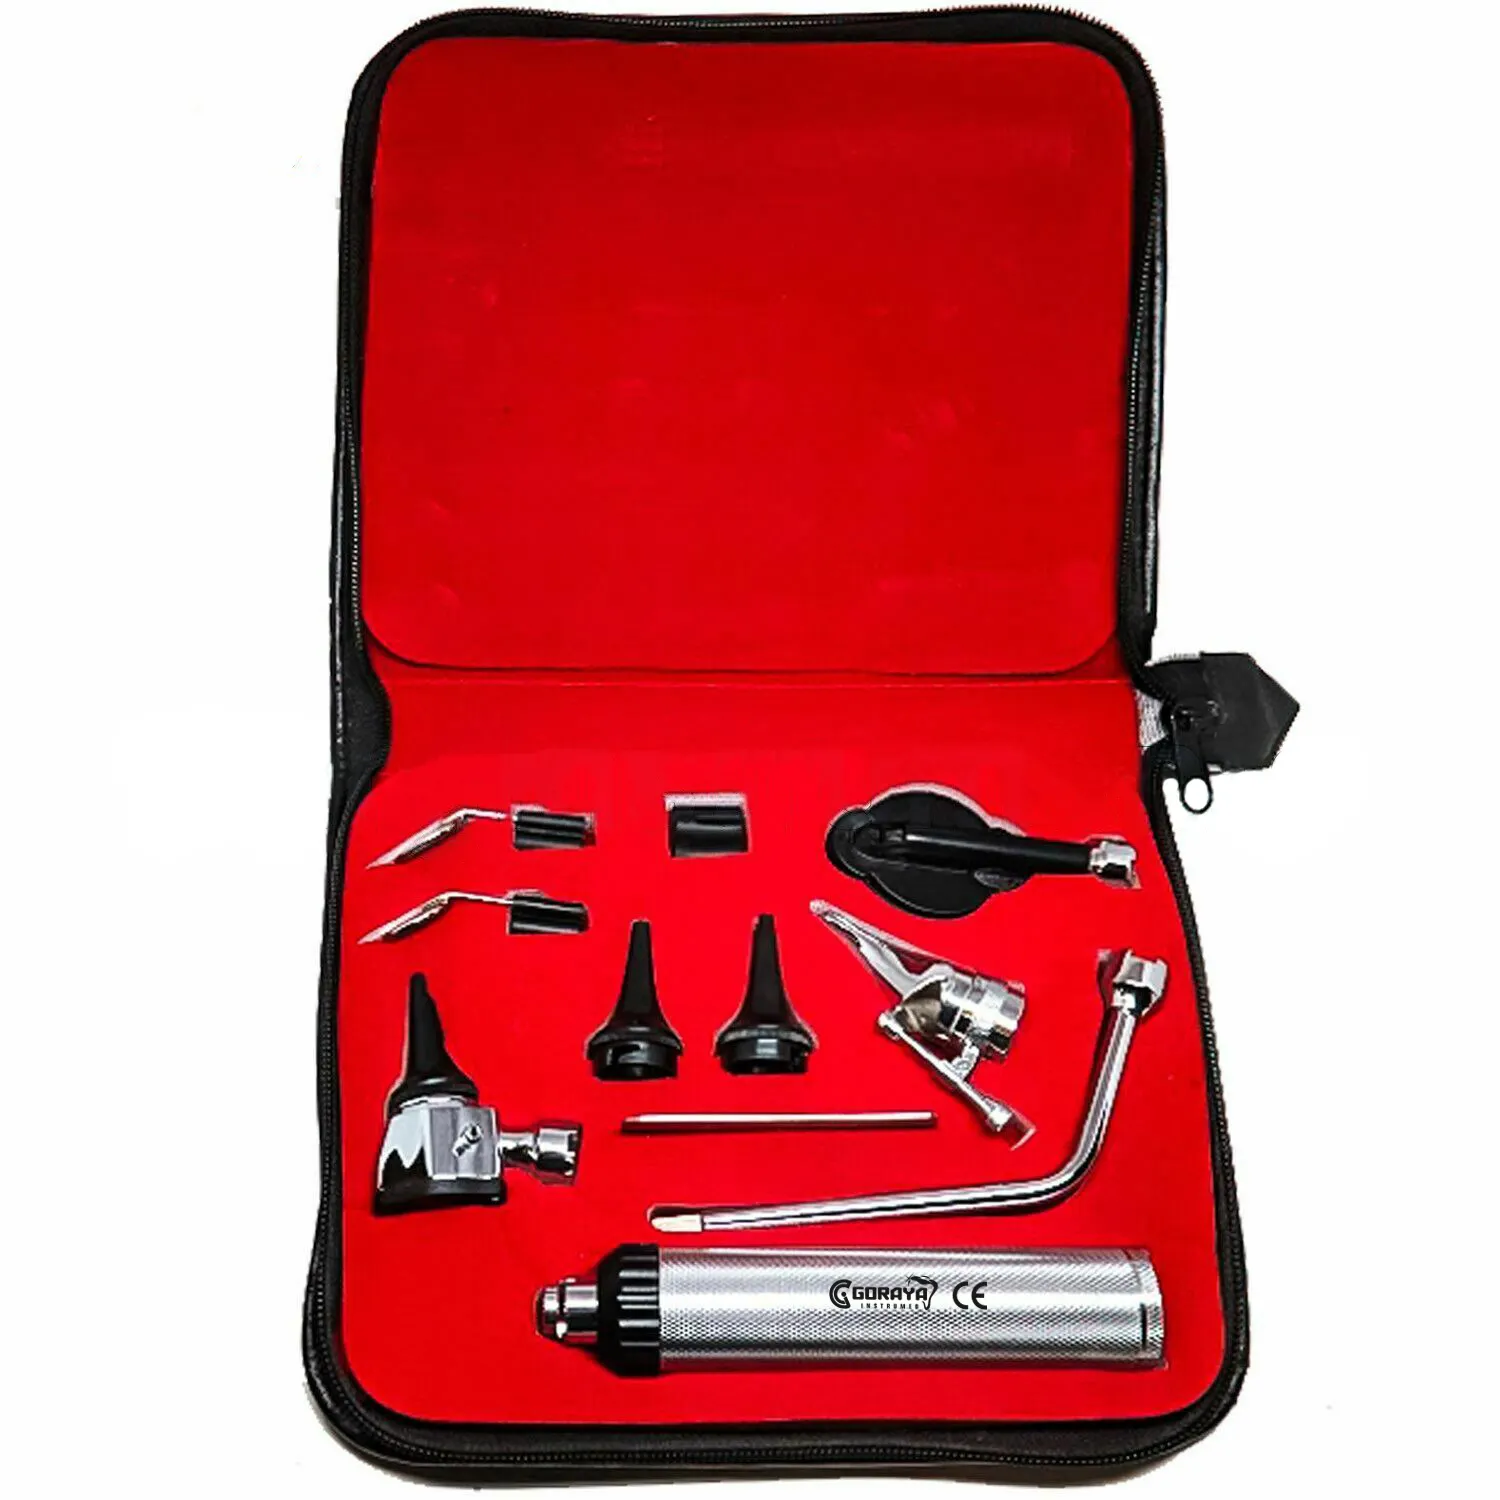 HOT SALE GORAYA GERMAN Otoscope & Ophthalmoscope Set ENT Surgical Instruments CE ISO APPROVED